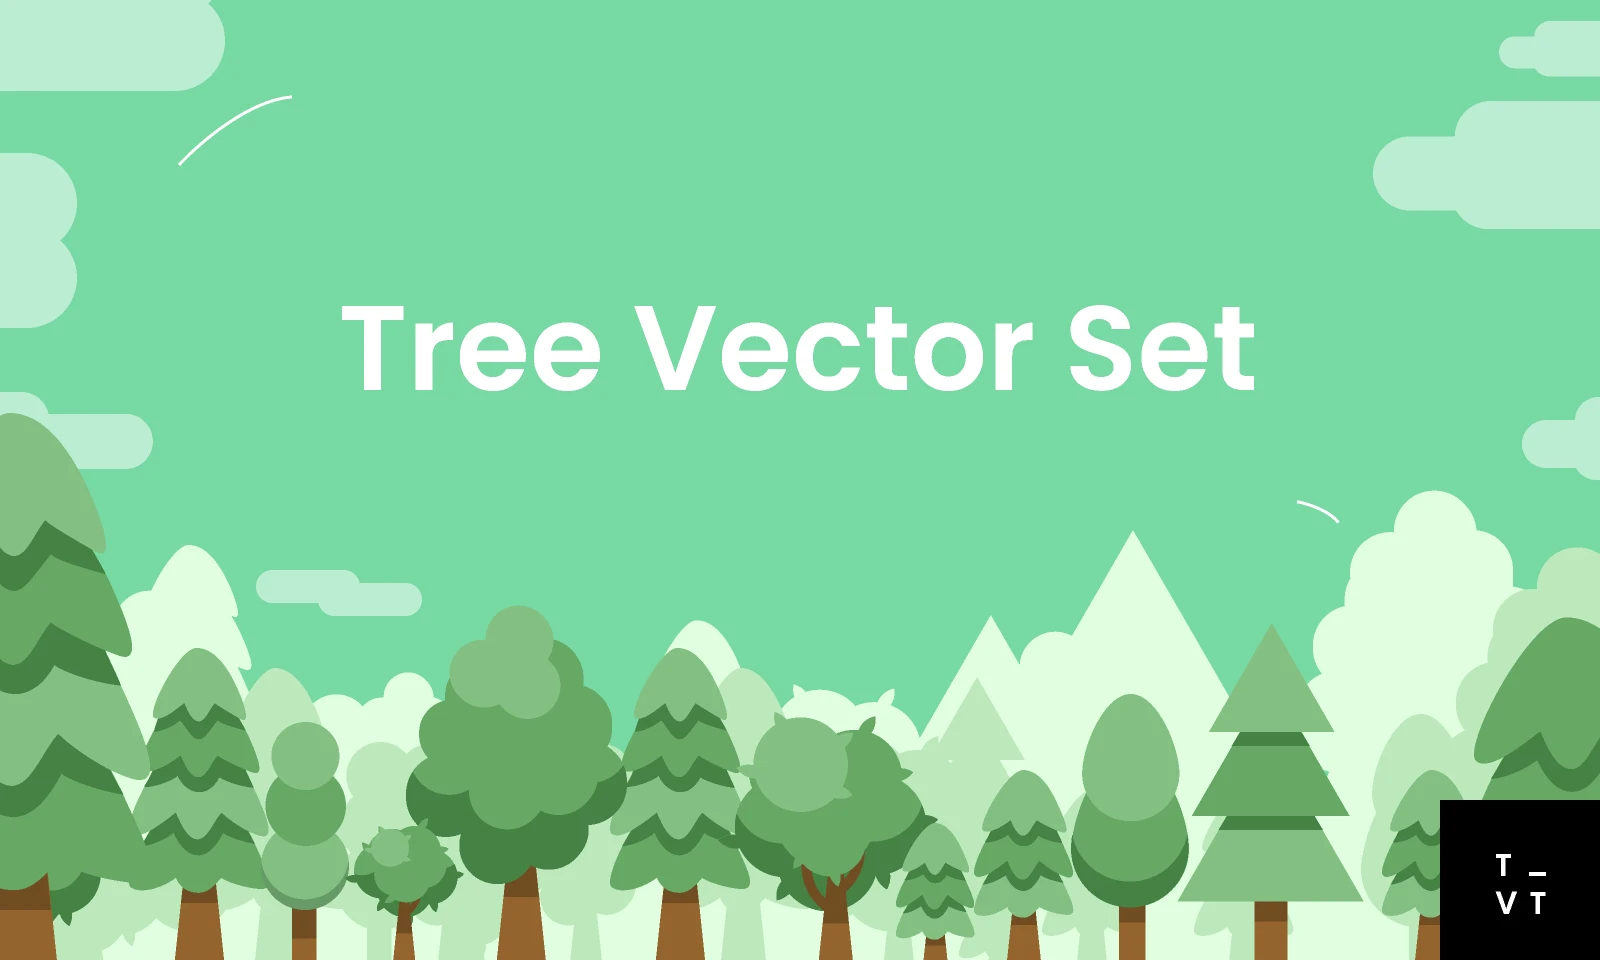 Tree Vector Set for Figma and Adobe XD